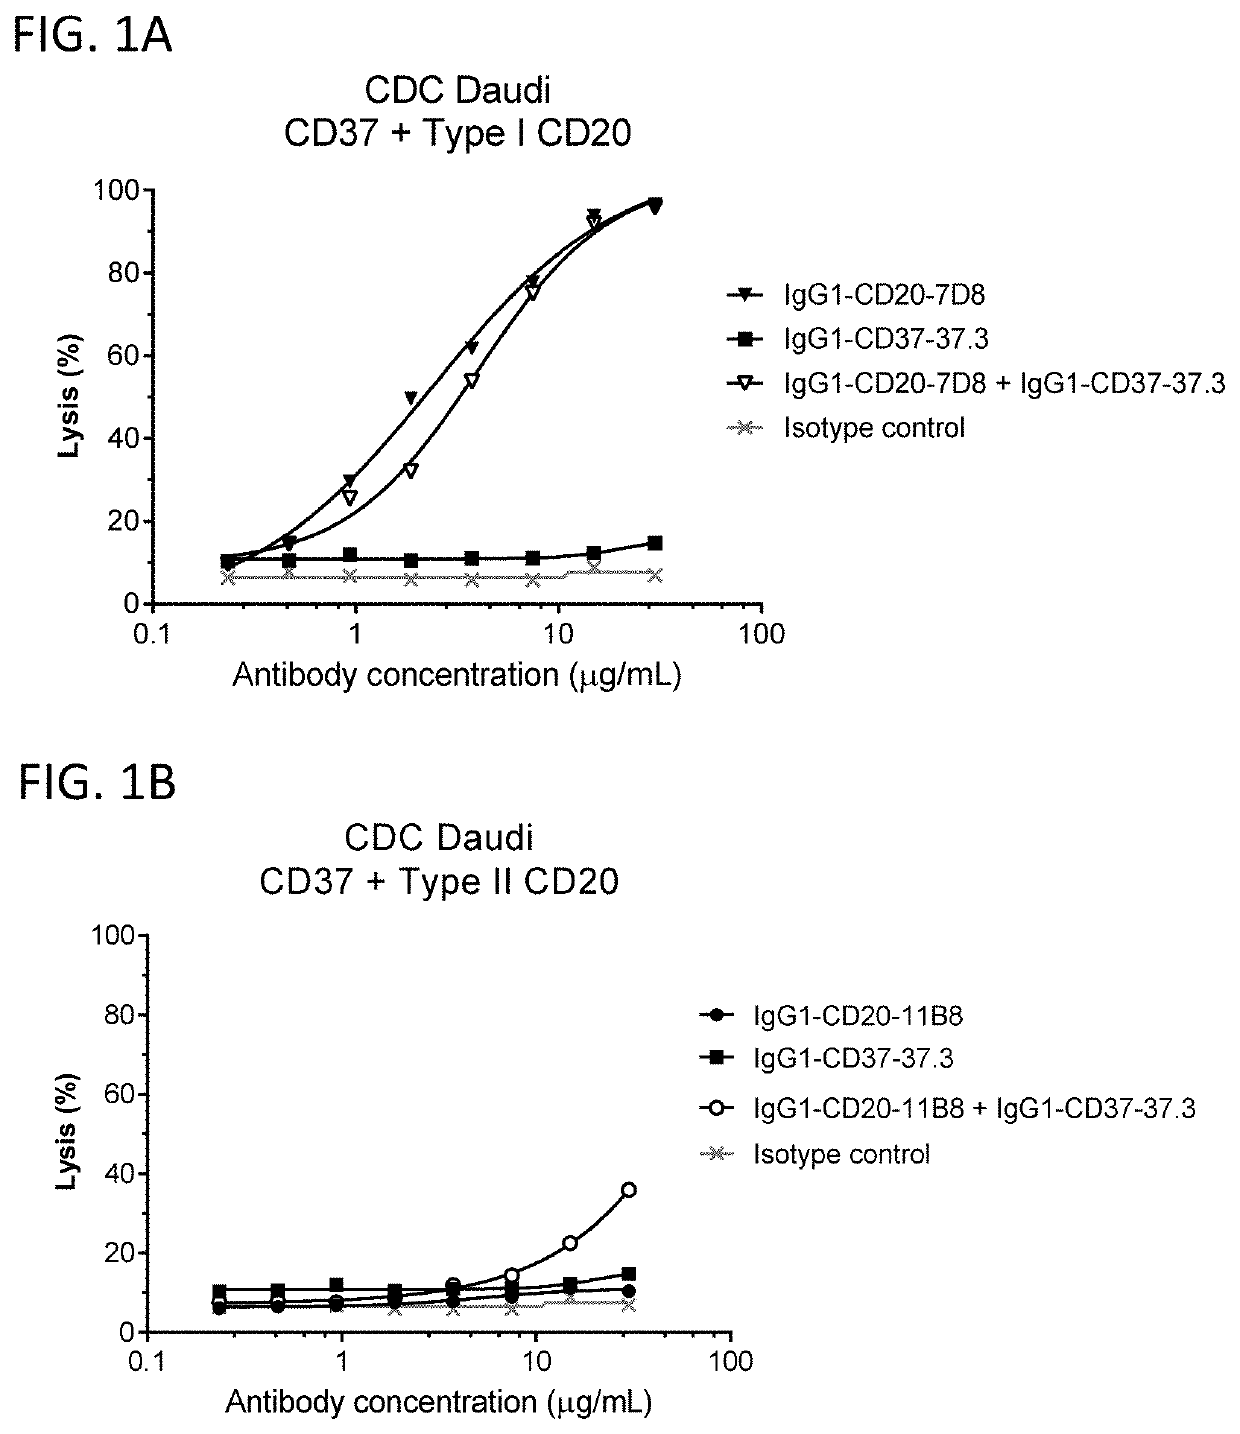 Anti-cd37 antibodies and Anti-cd20 antibodies, compositions and methods of use thereof